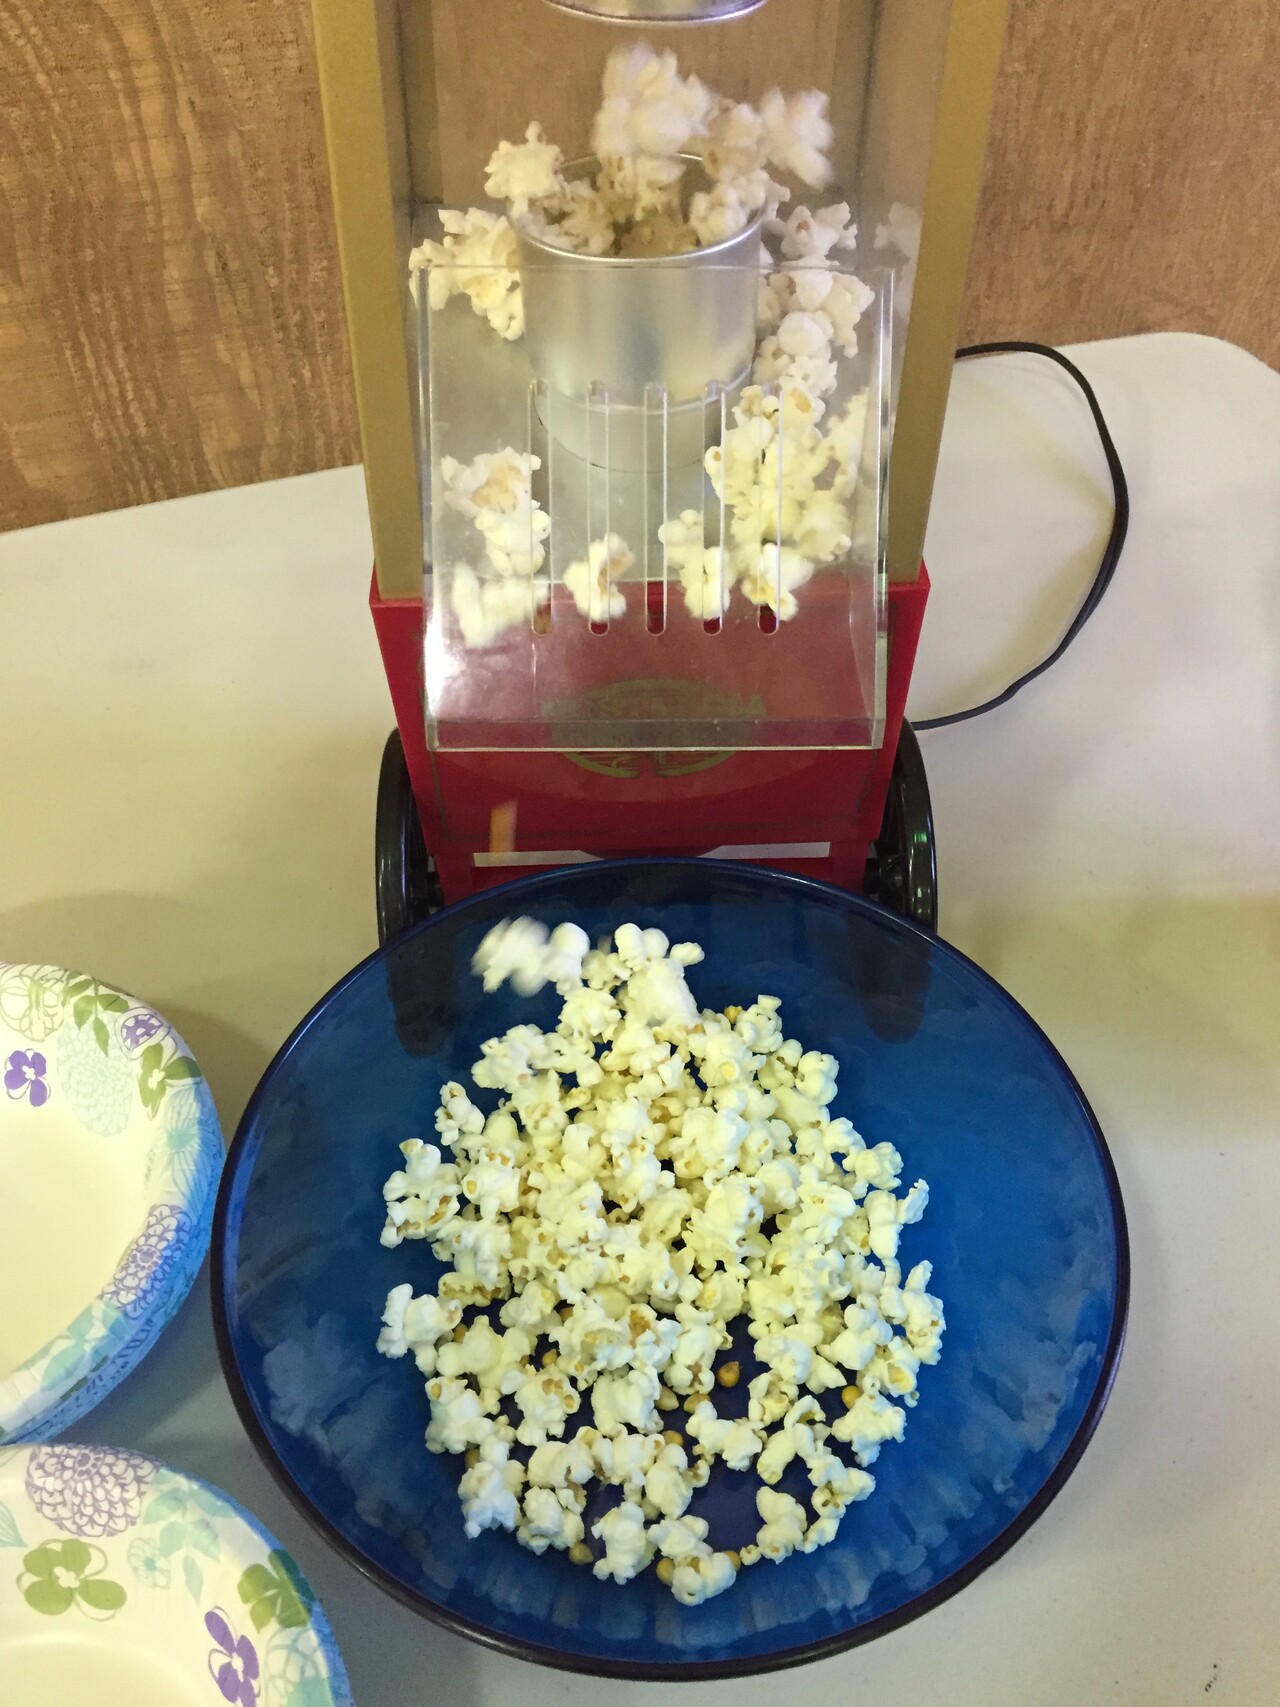 A blue bowl catches the hot popcorn as it falls from the red air popper at Mayeda Movie Night.